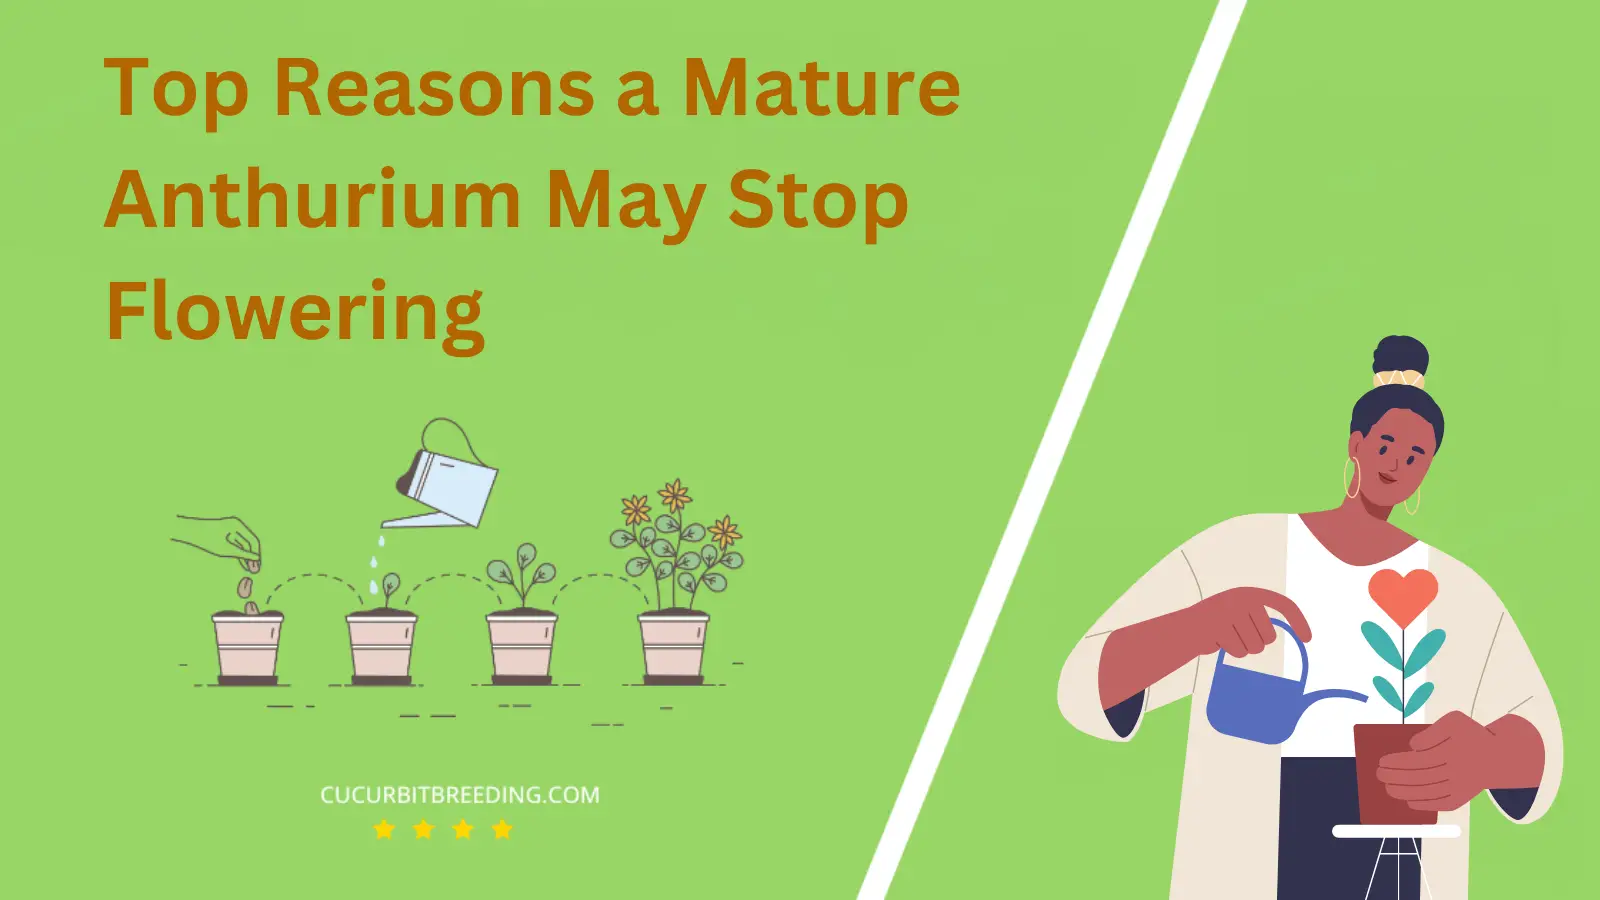 Top Reasons a Mature Anthurium May Stop Flowering